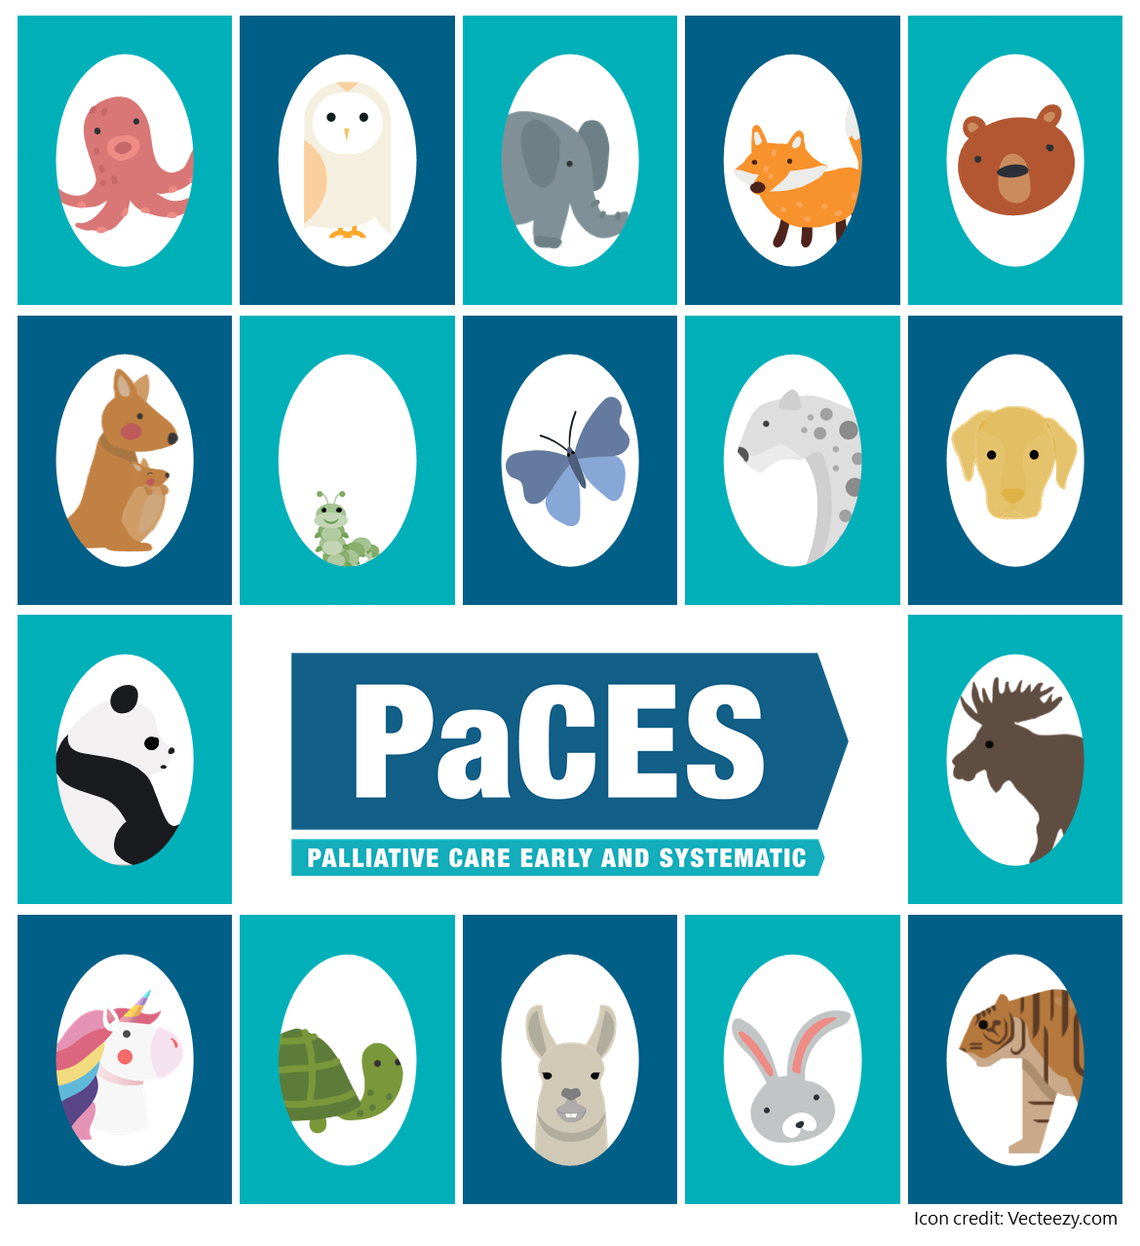 PaCES animal collage